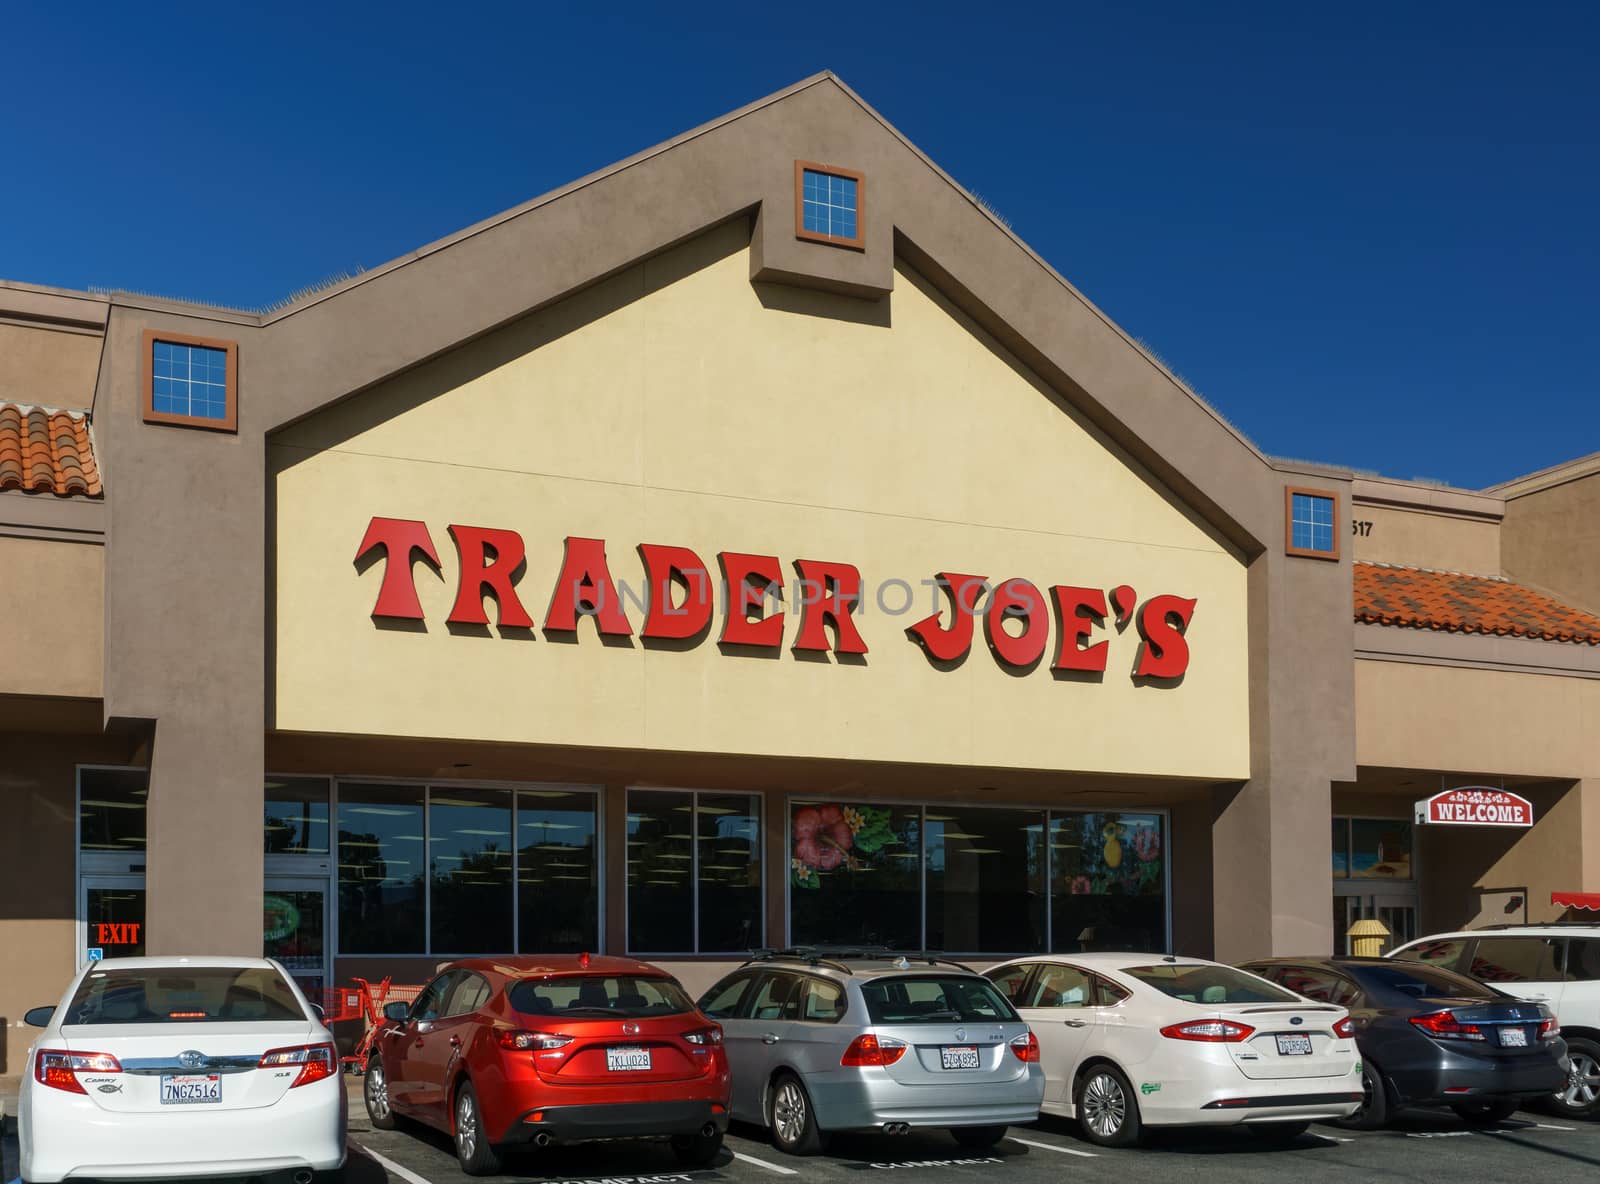 Trader Joe's Exterior and Sign by wolterk